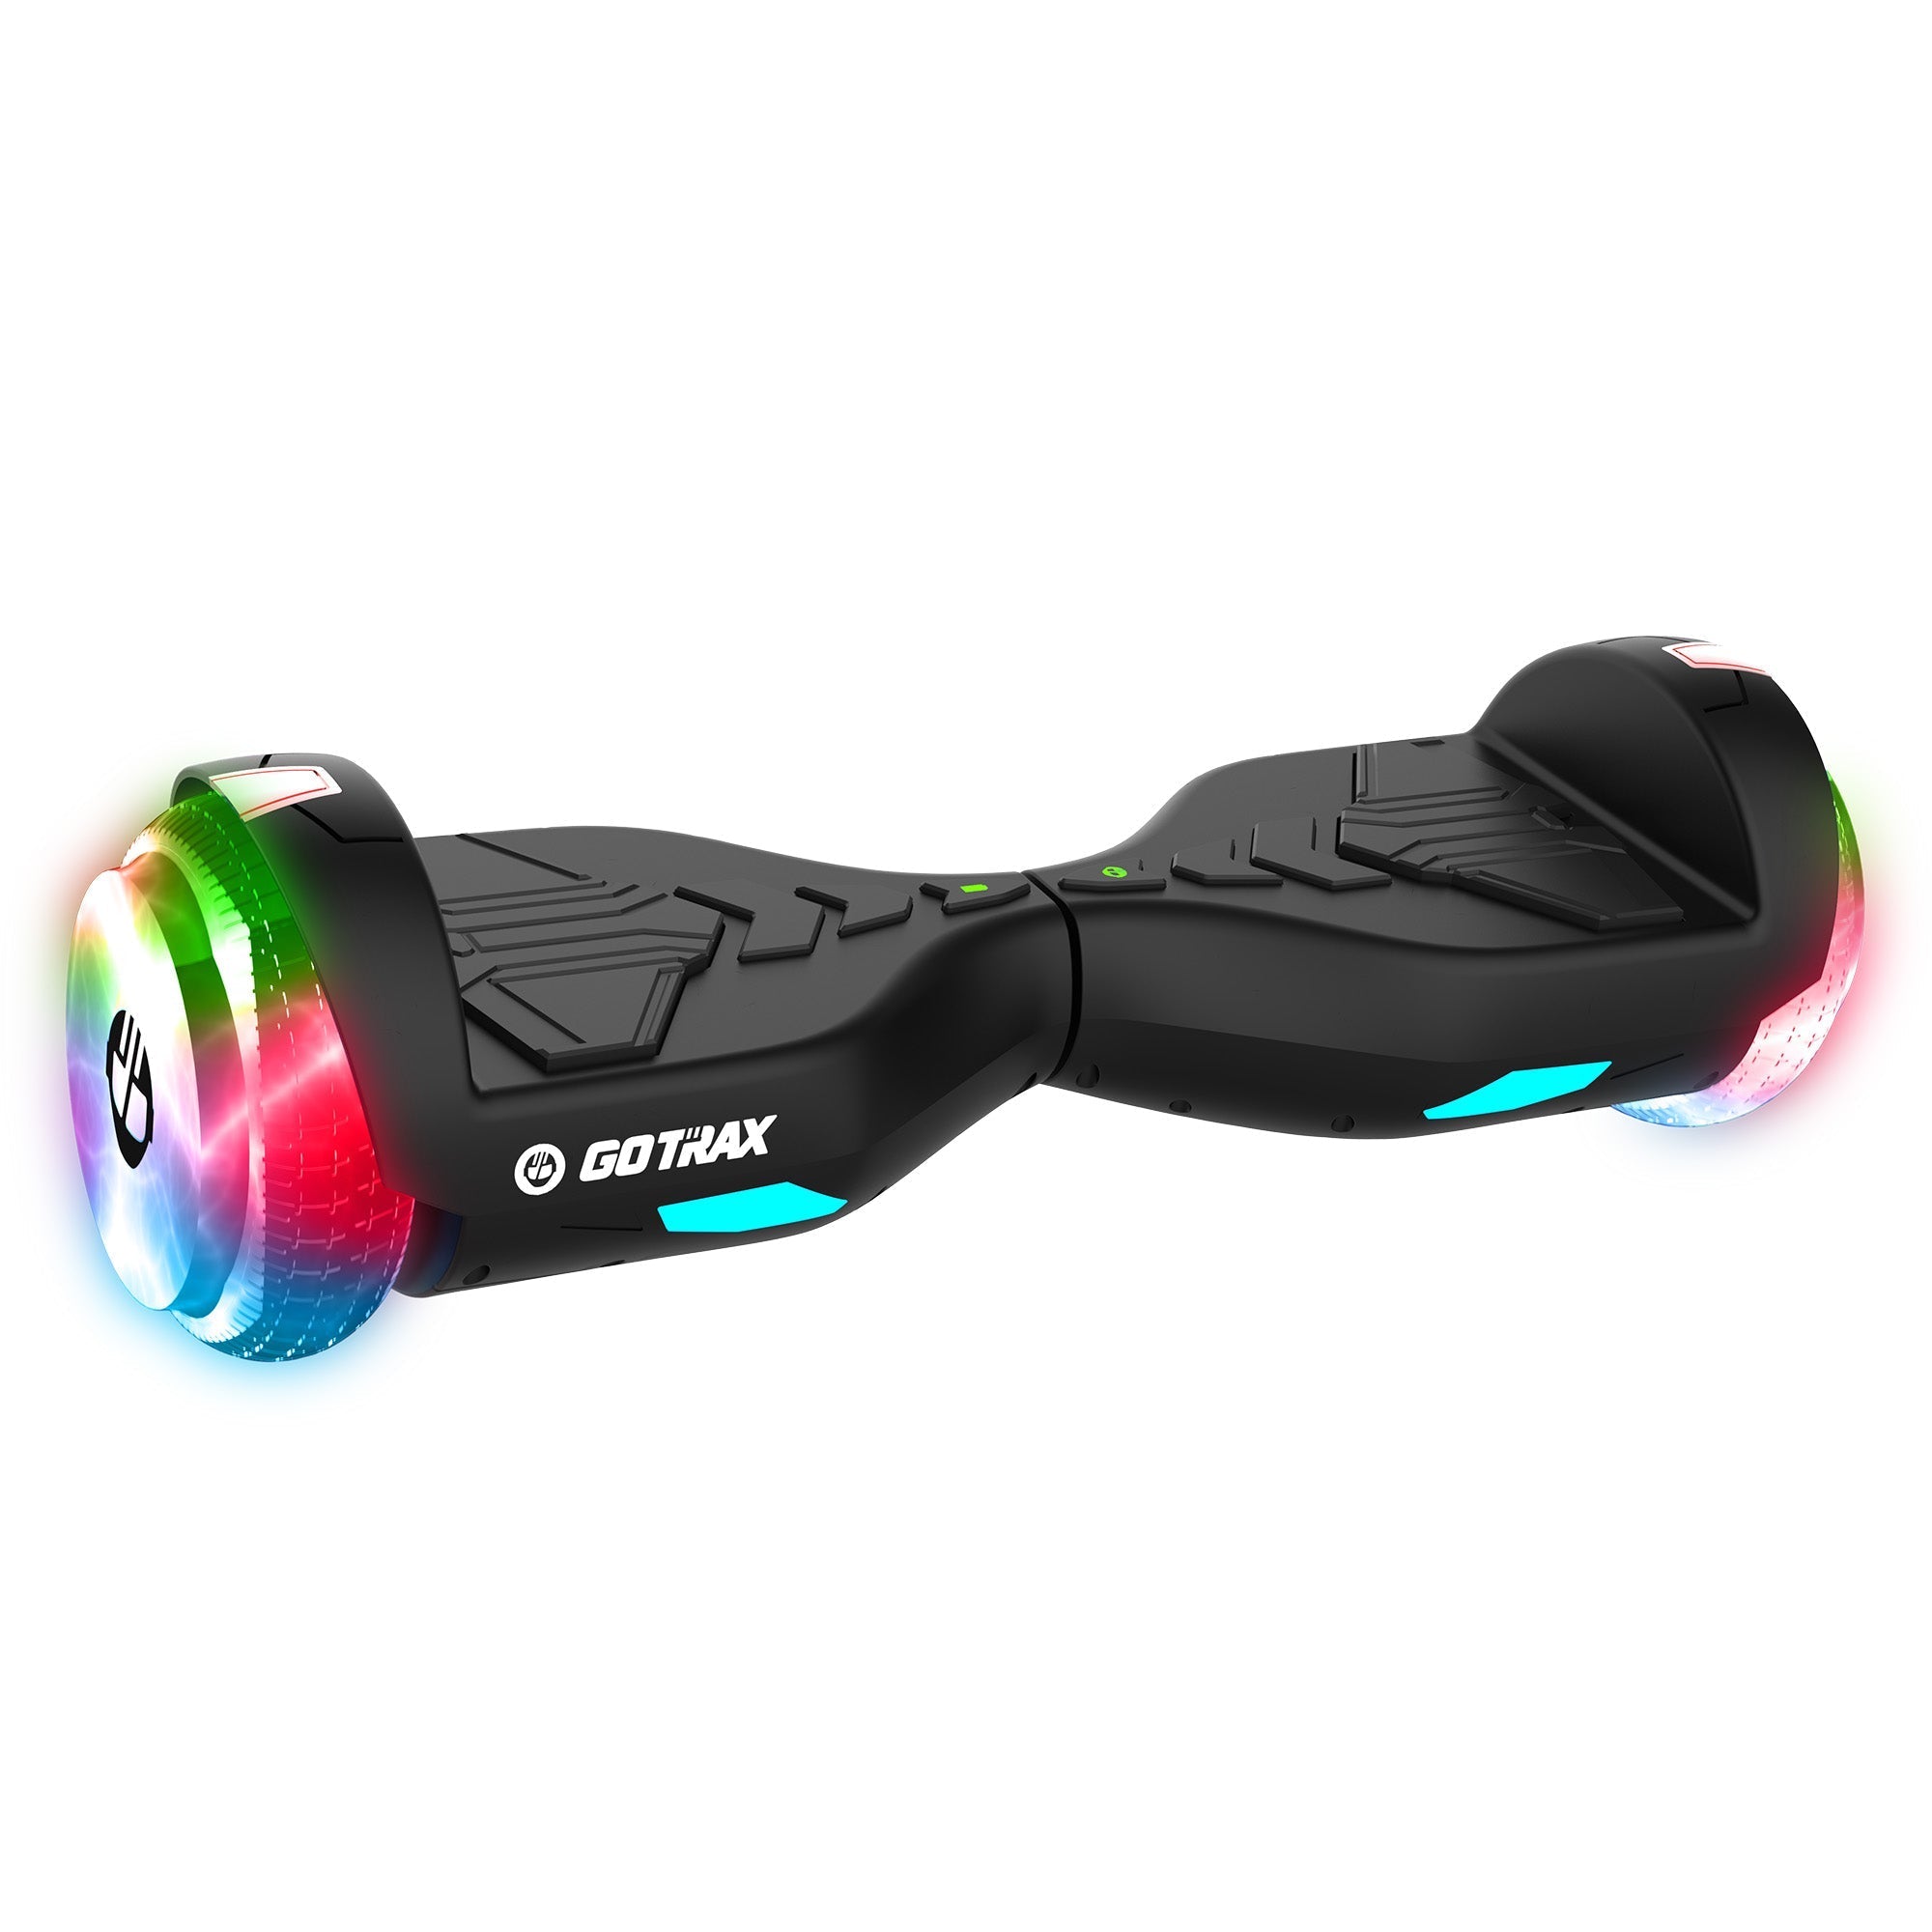 Surge LED Hoverboard 6.5" - GOTRAX